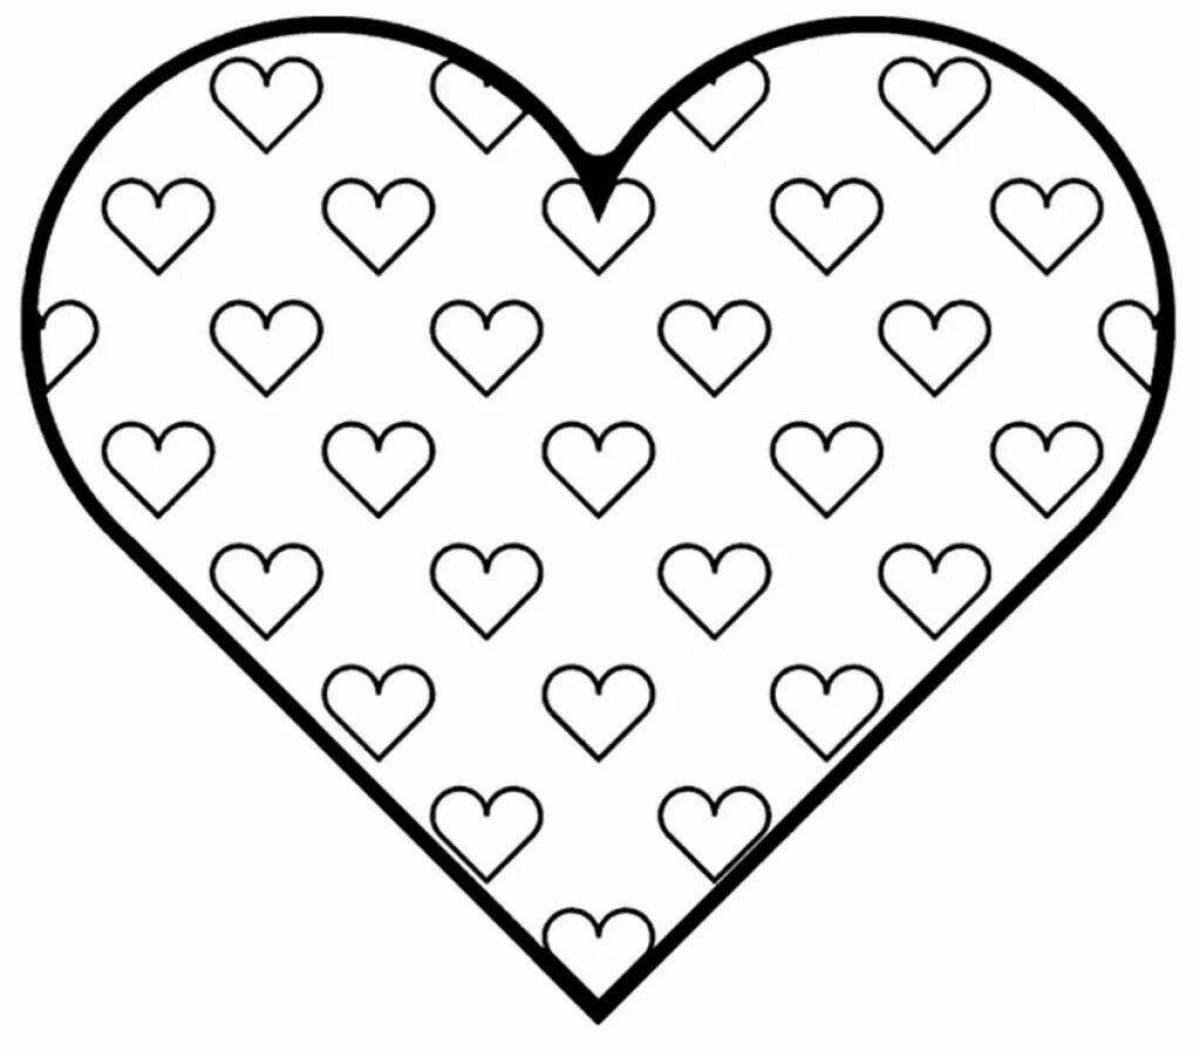 Glowing heart coloring pages